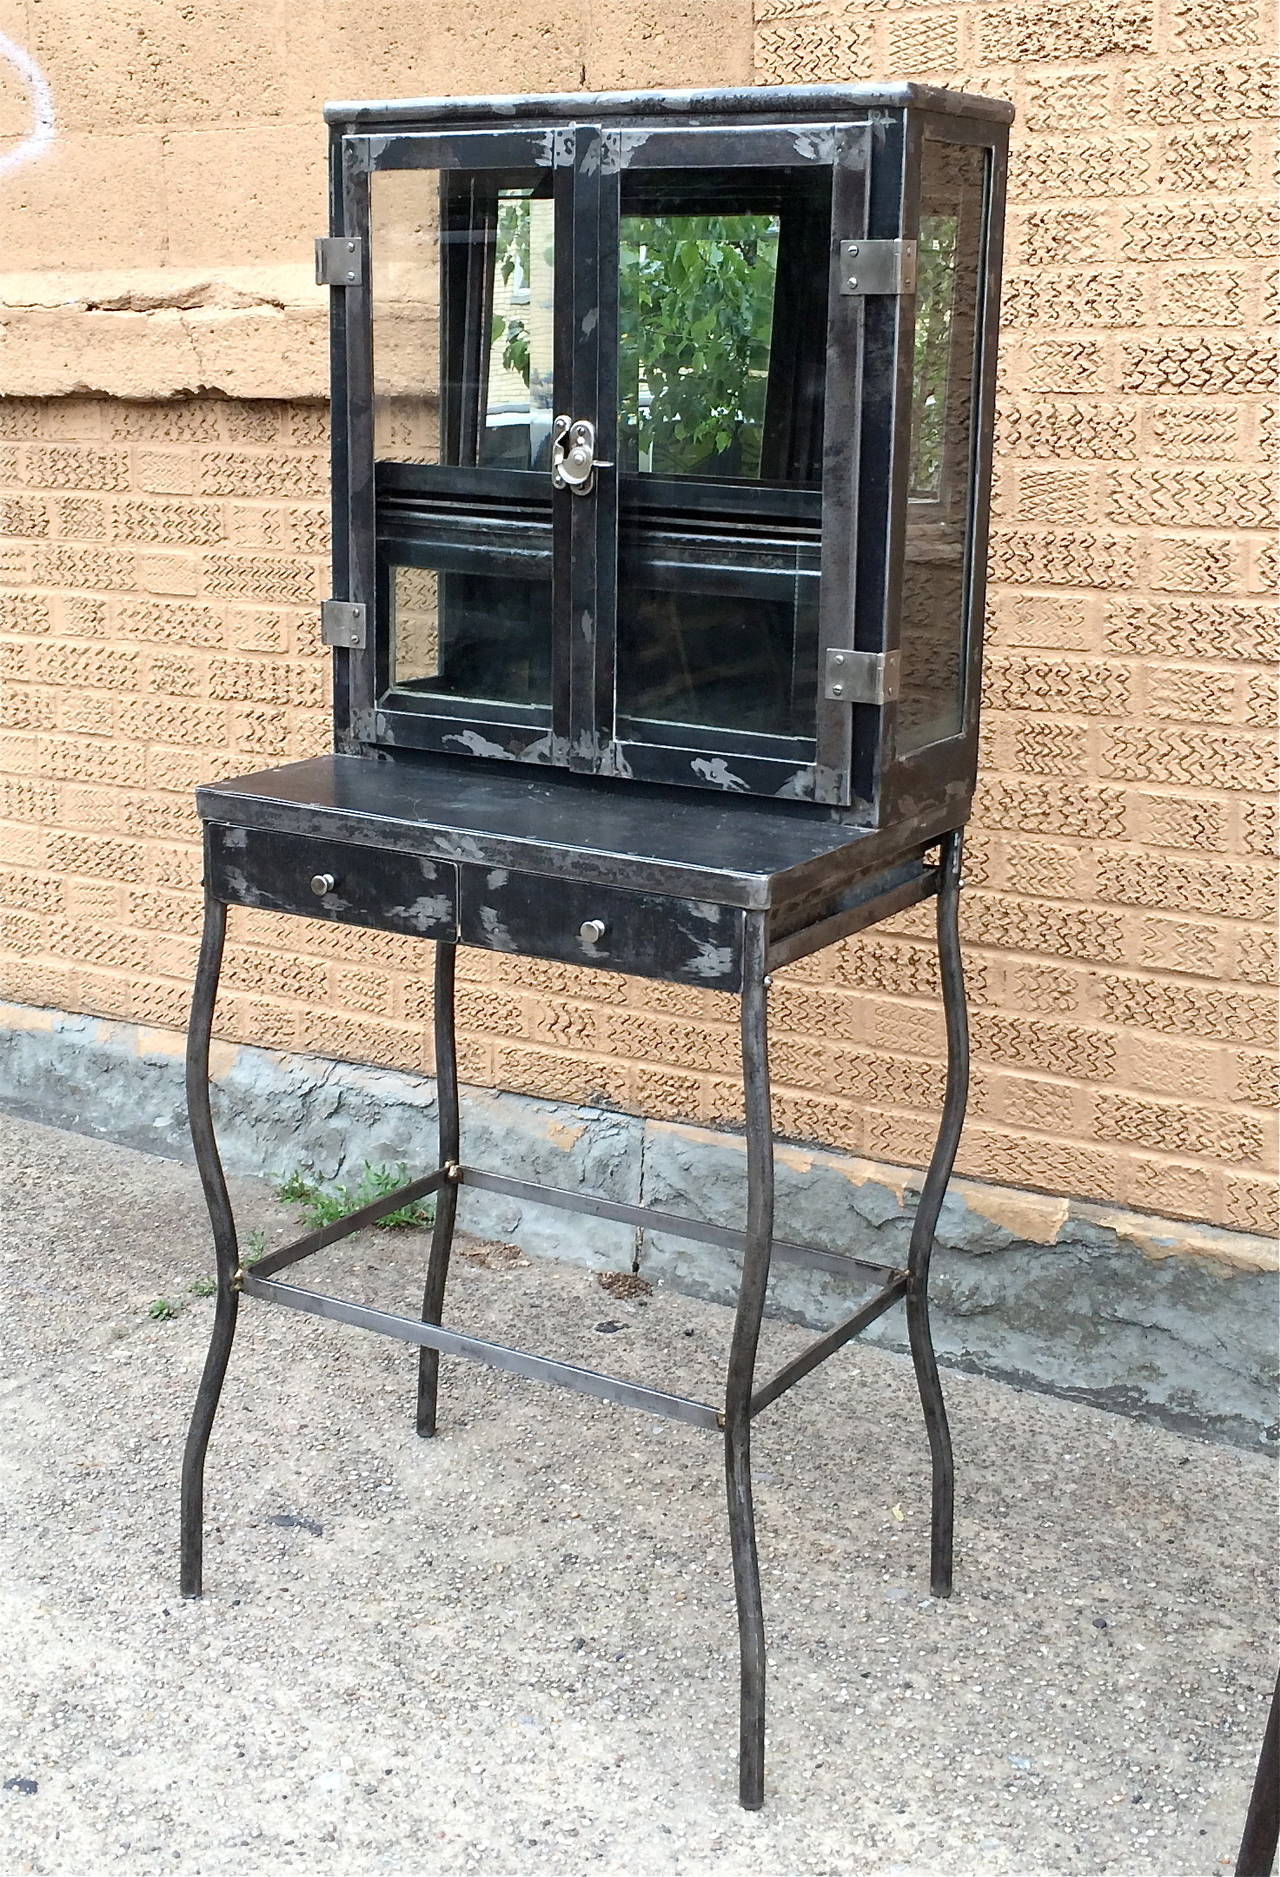 1930s, brushed steel, two drawer, apothecary, dentist medicine cabinet with three sided glass top cabinet with mirror backing and wood shelf. Top shelf depth is 7.5 inches.